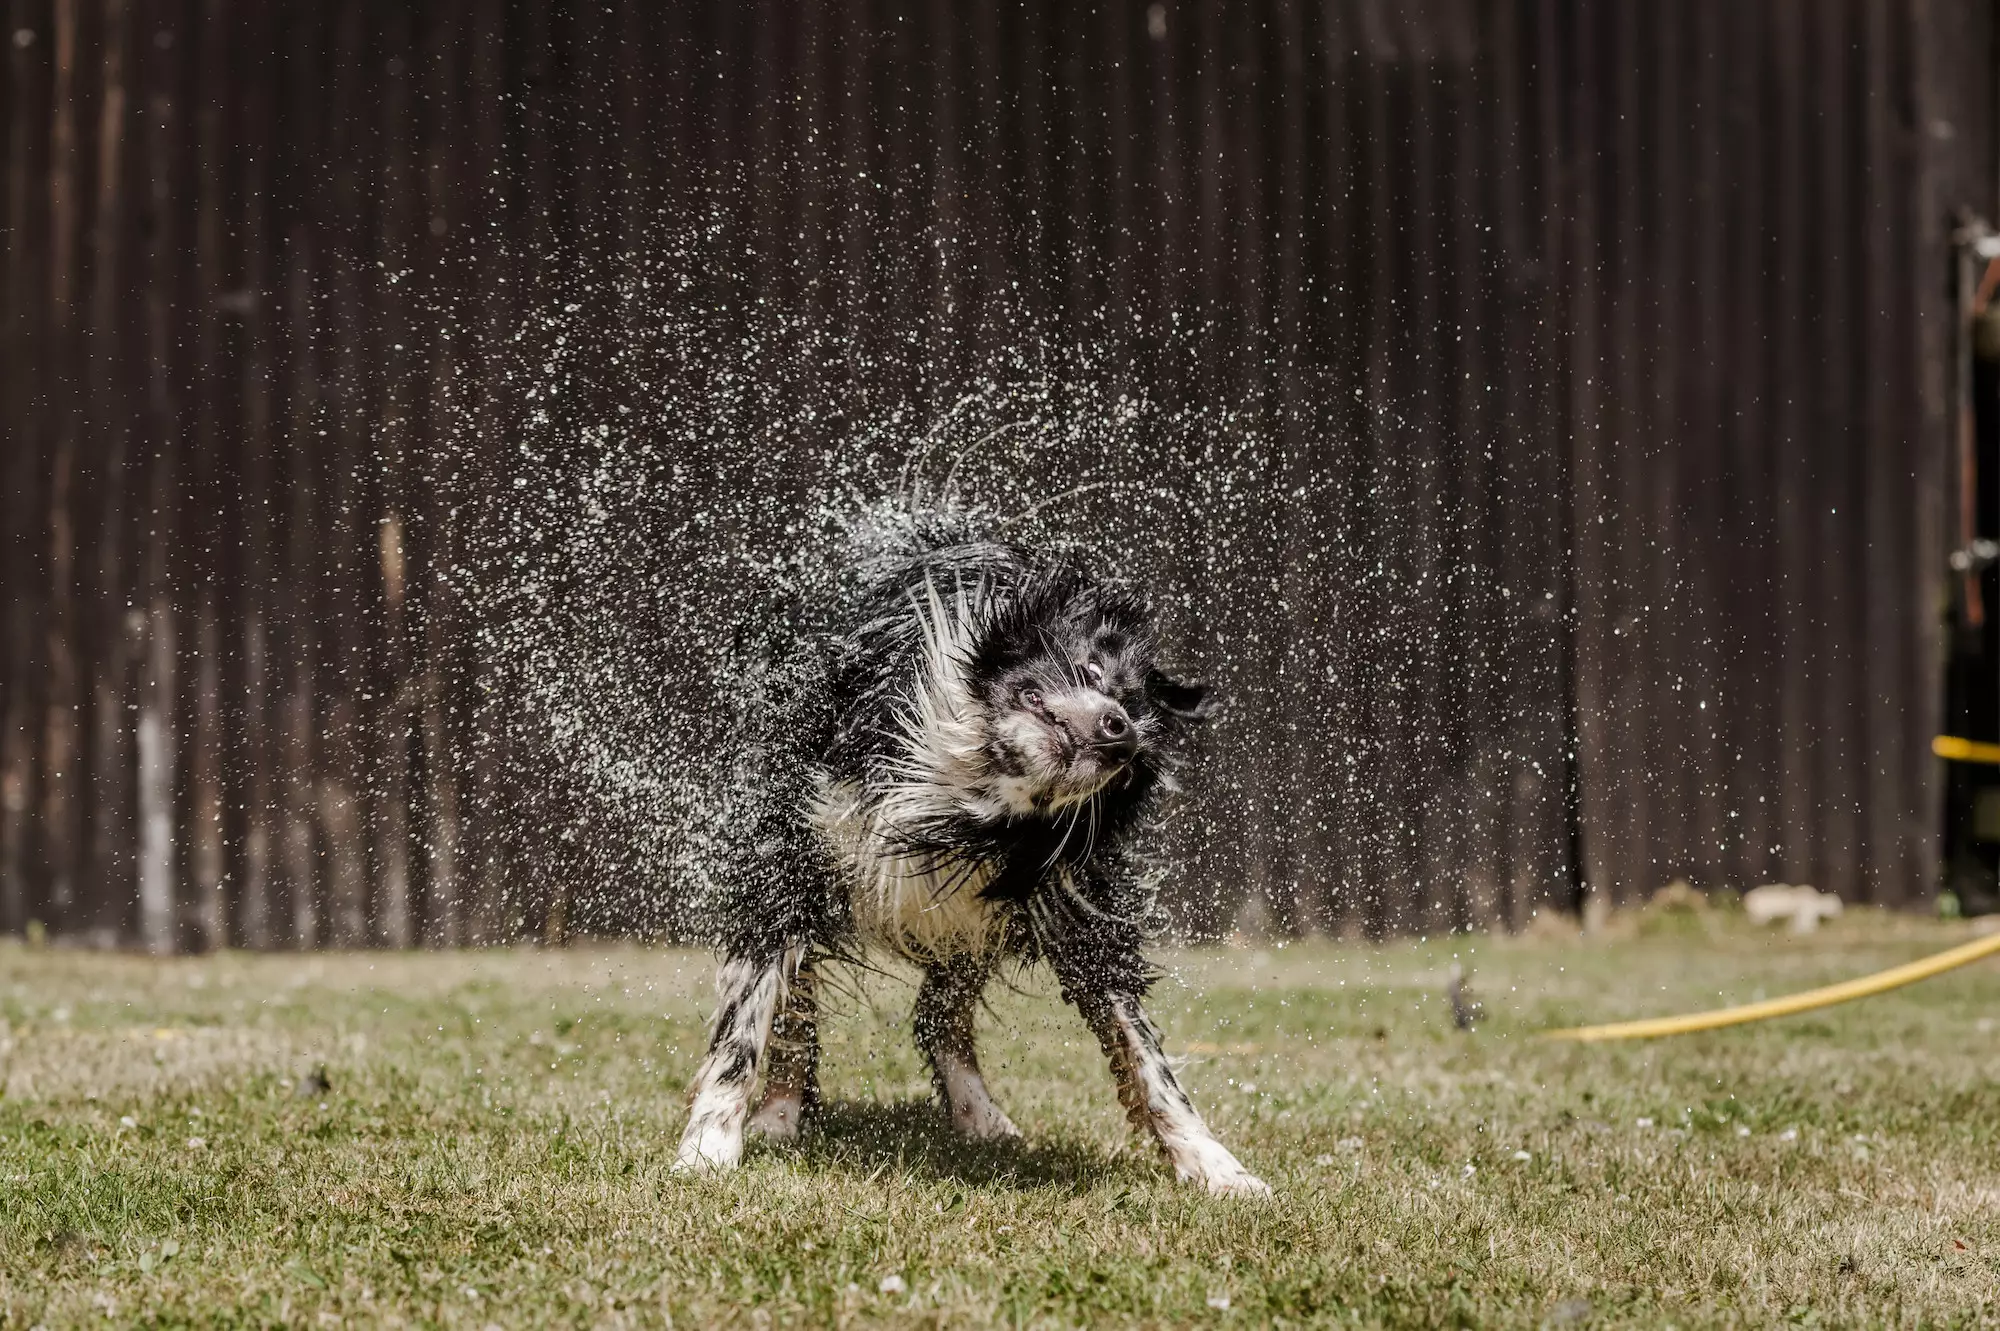 Heatstroke in dogs can be fatal, so it's essential that your pup has easy access to shade and plenty of water (